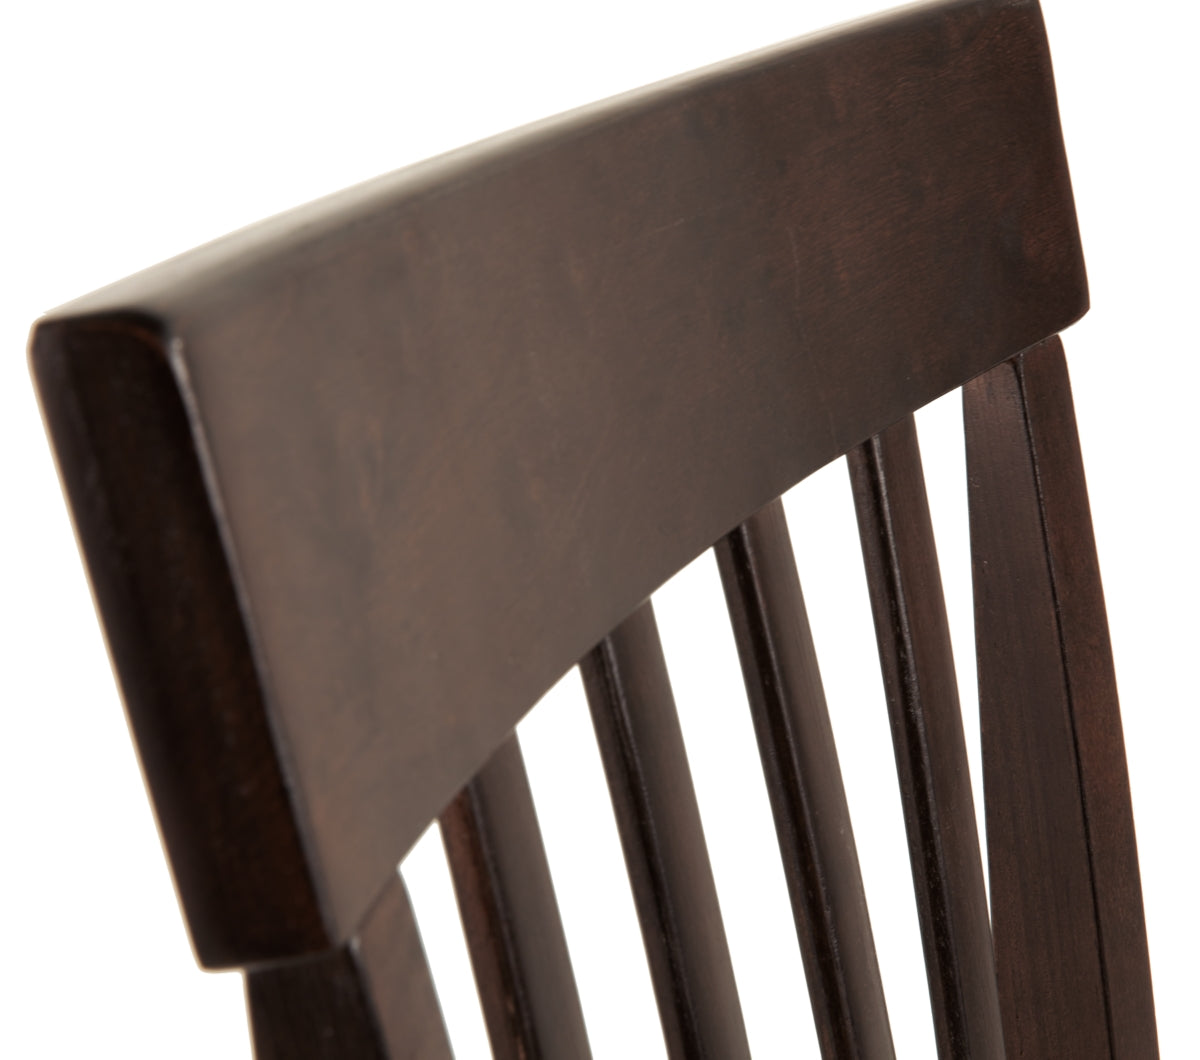 Hammis Dining Chair - furniture place usa